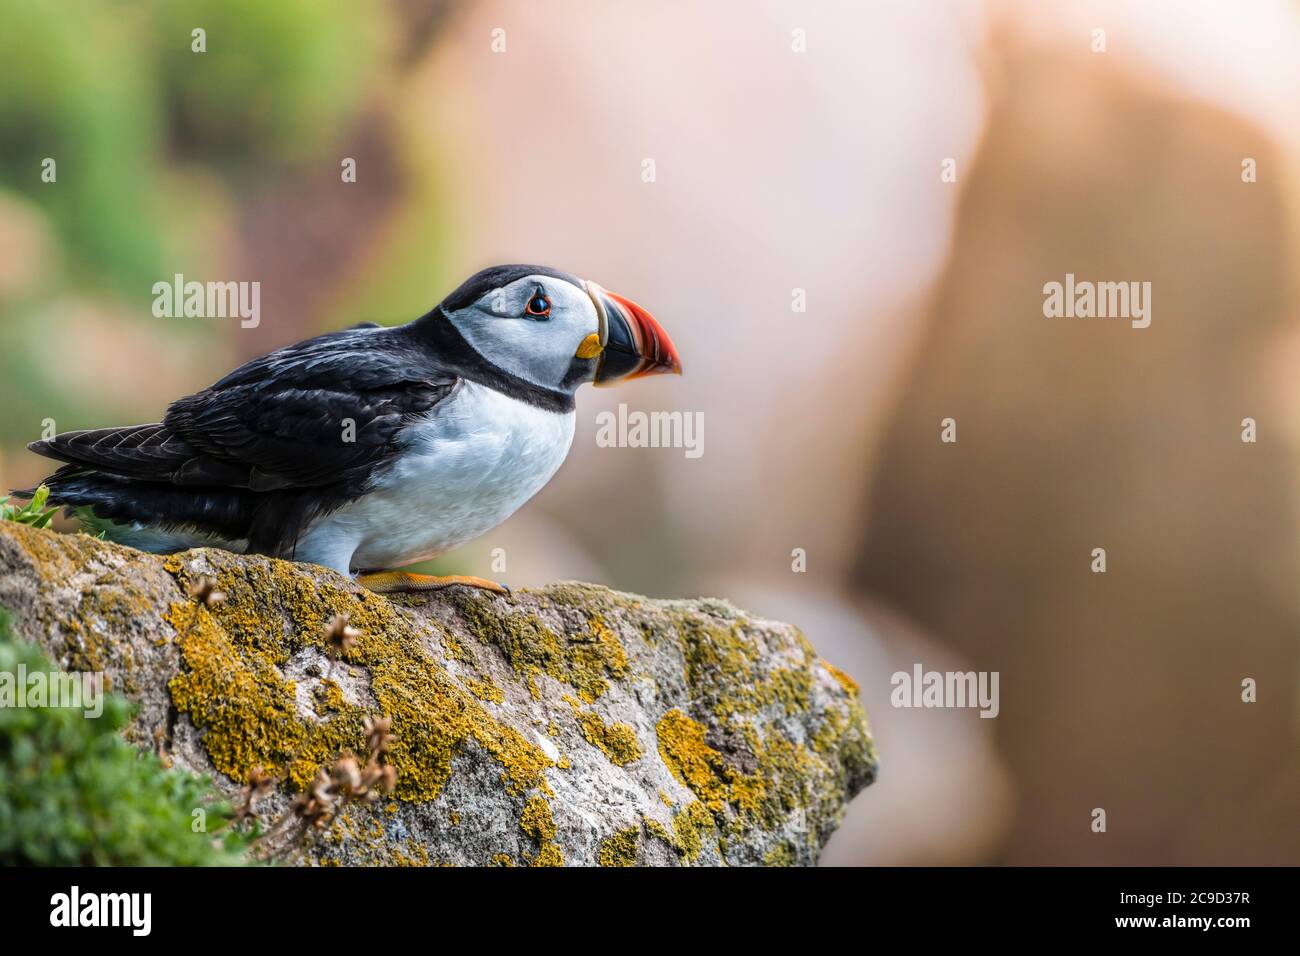 Atlantic puffin, Fratercula arctica, resting atop a cliff. Soft background  Great Saltee Island, South of Ireland. Stock Photo